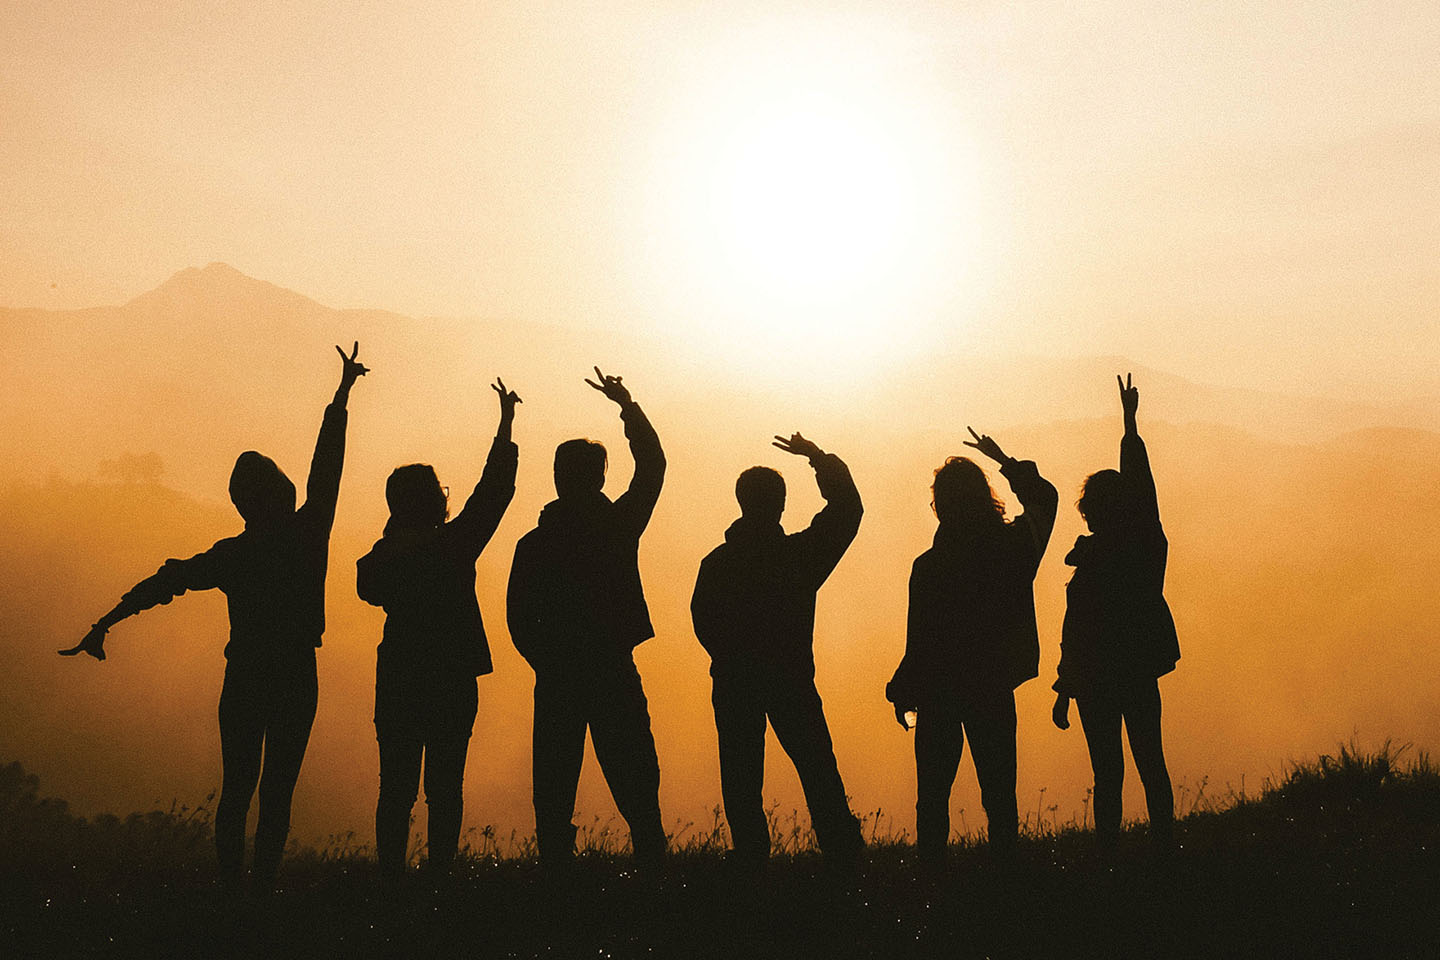 A landscape photo of several youth, with their silhouettes standing atop of a grassy hill amdist a sunset.